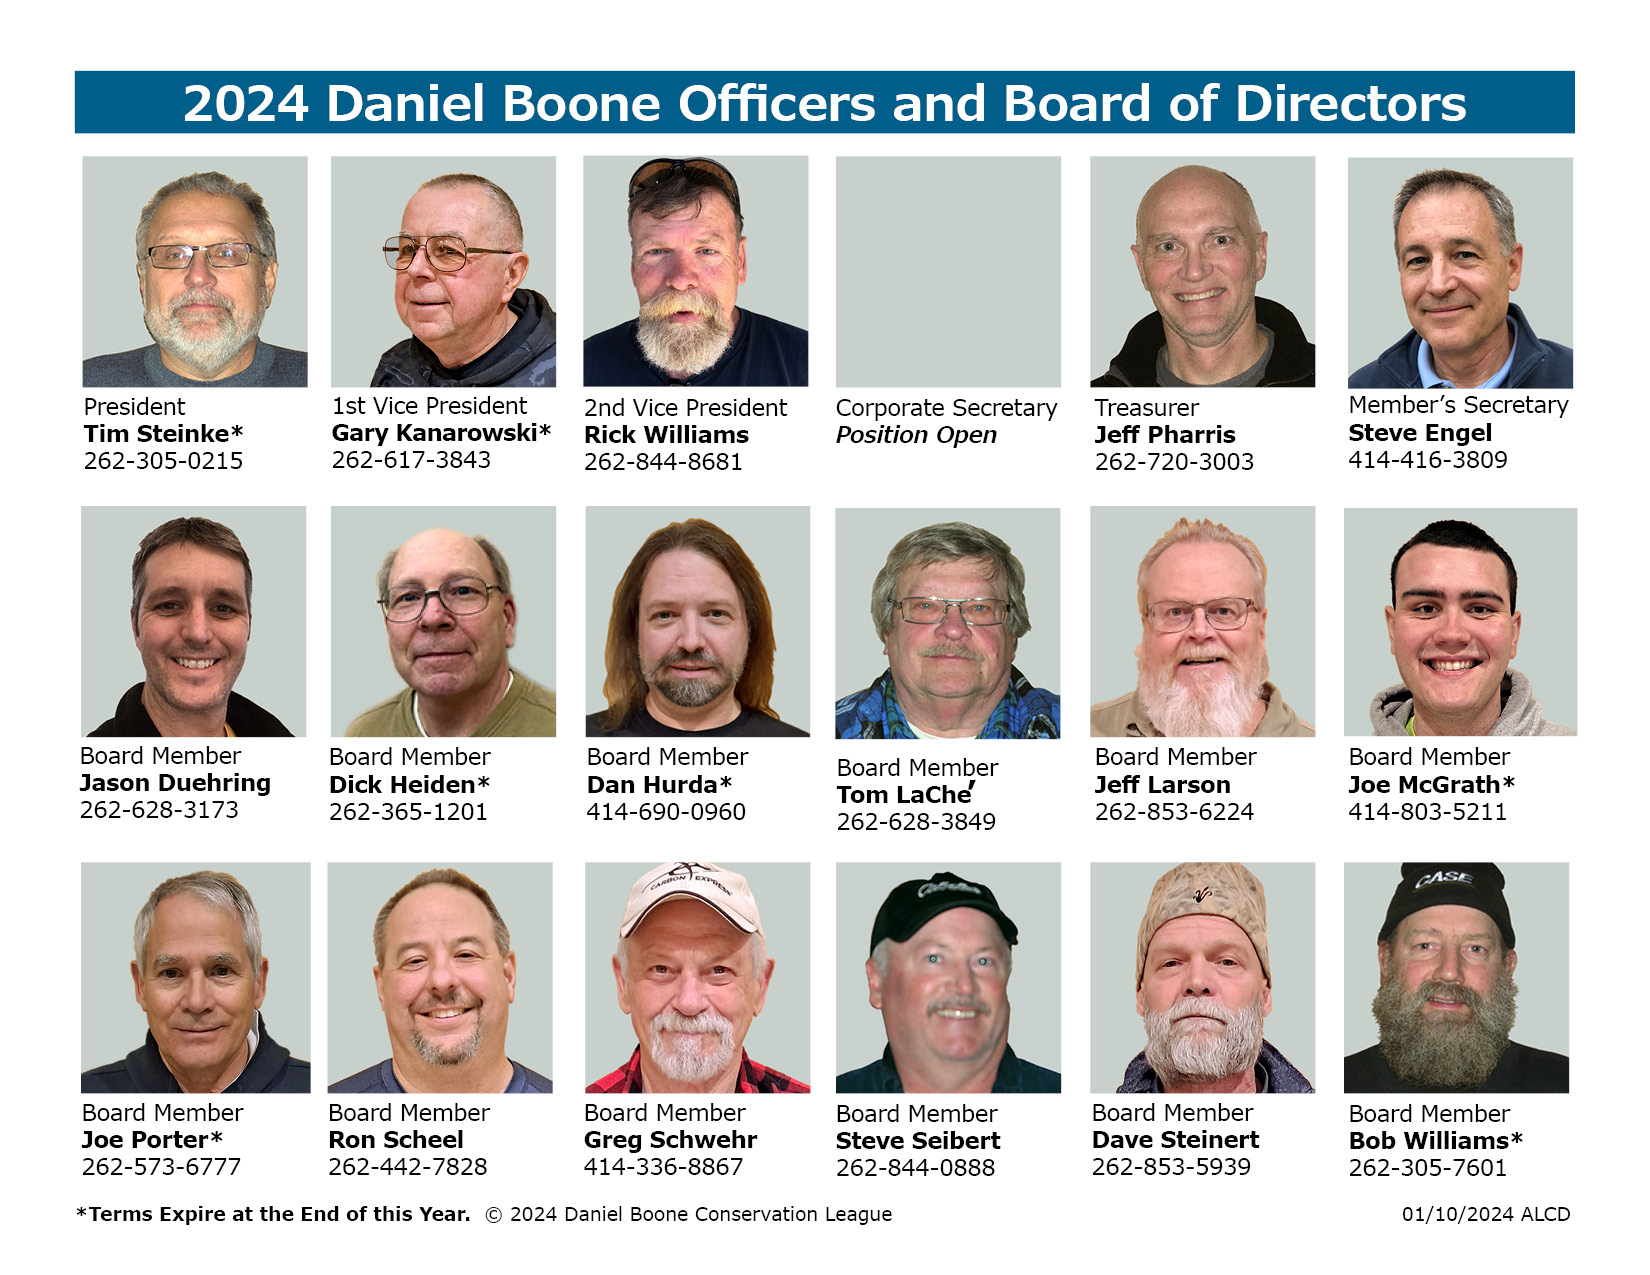 Officers and Board Members